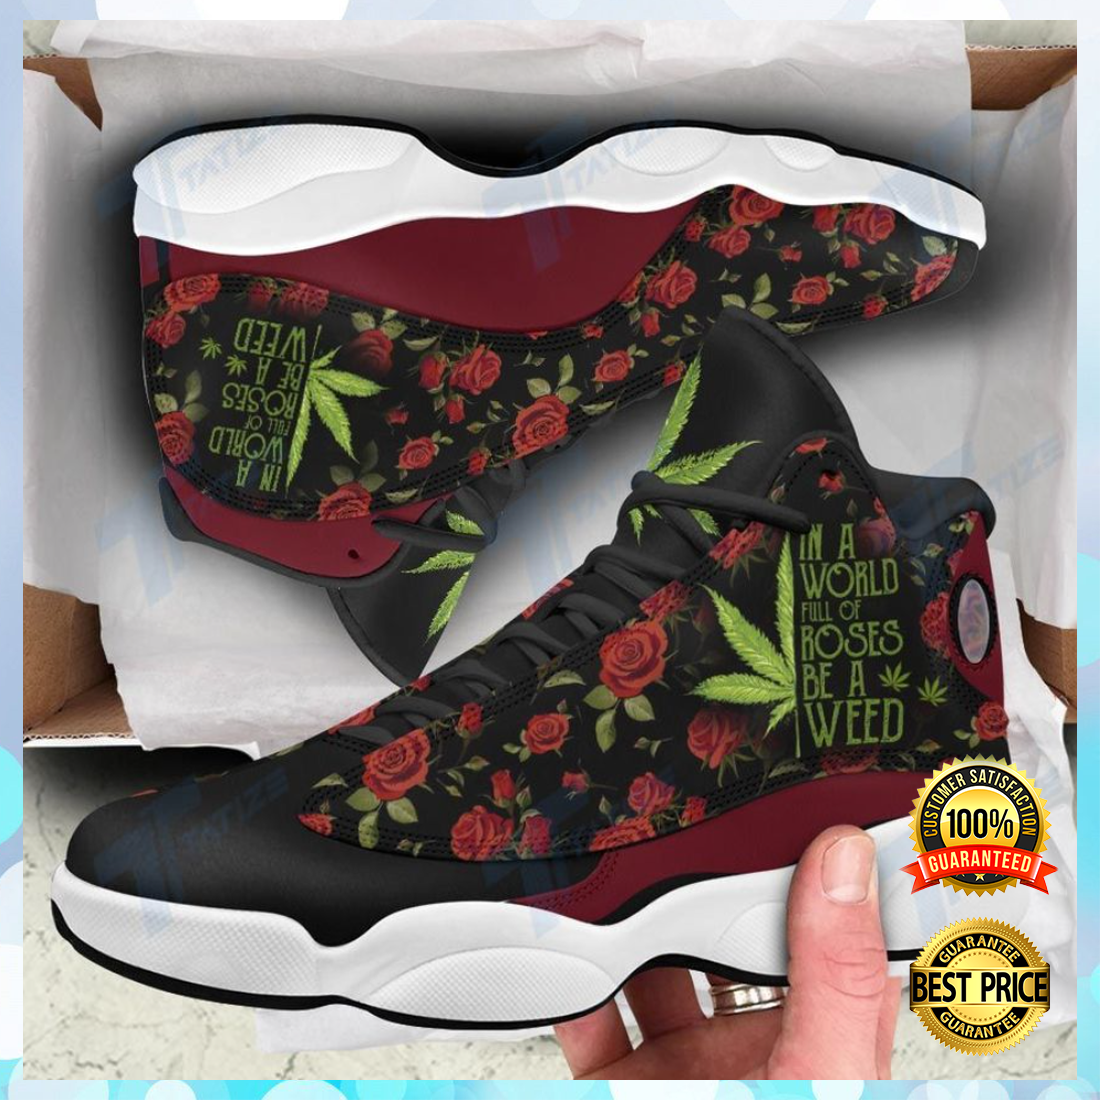 In a world full of roses be a weed Jordan 13 sneaker 4